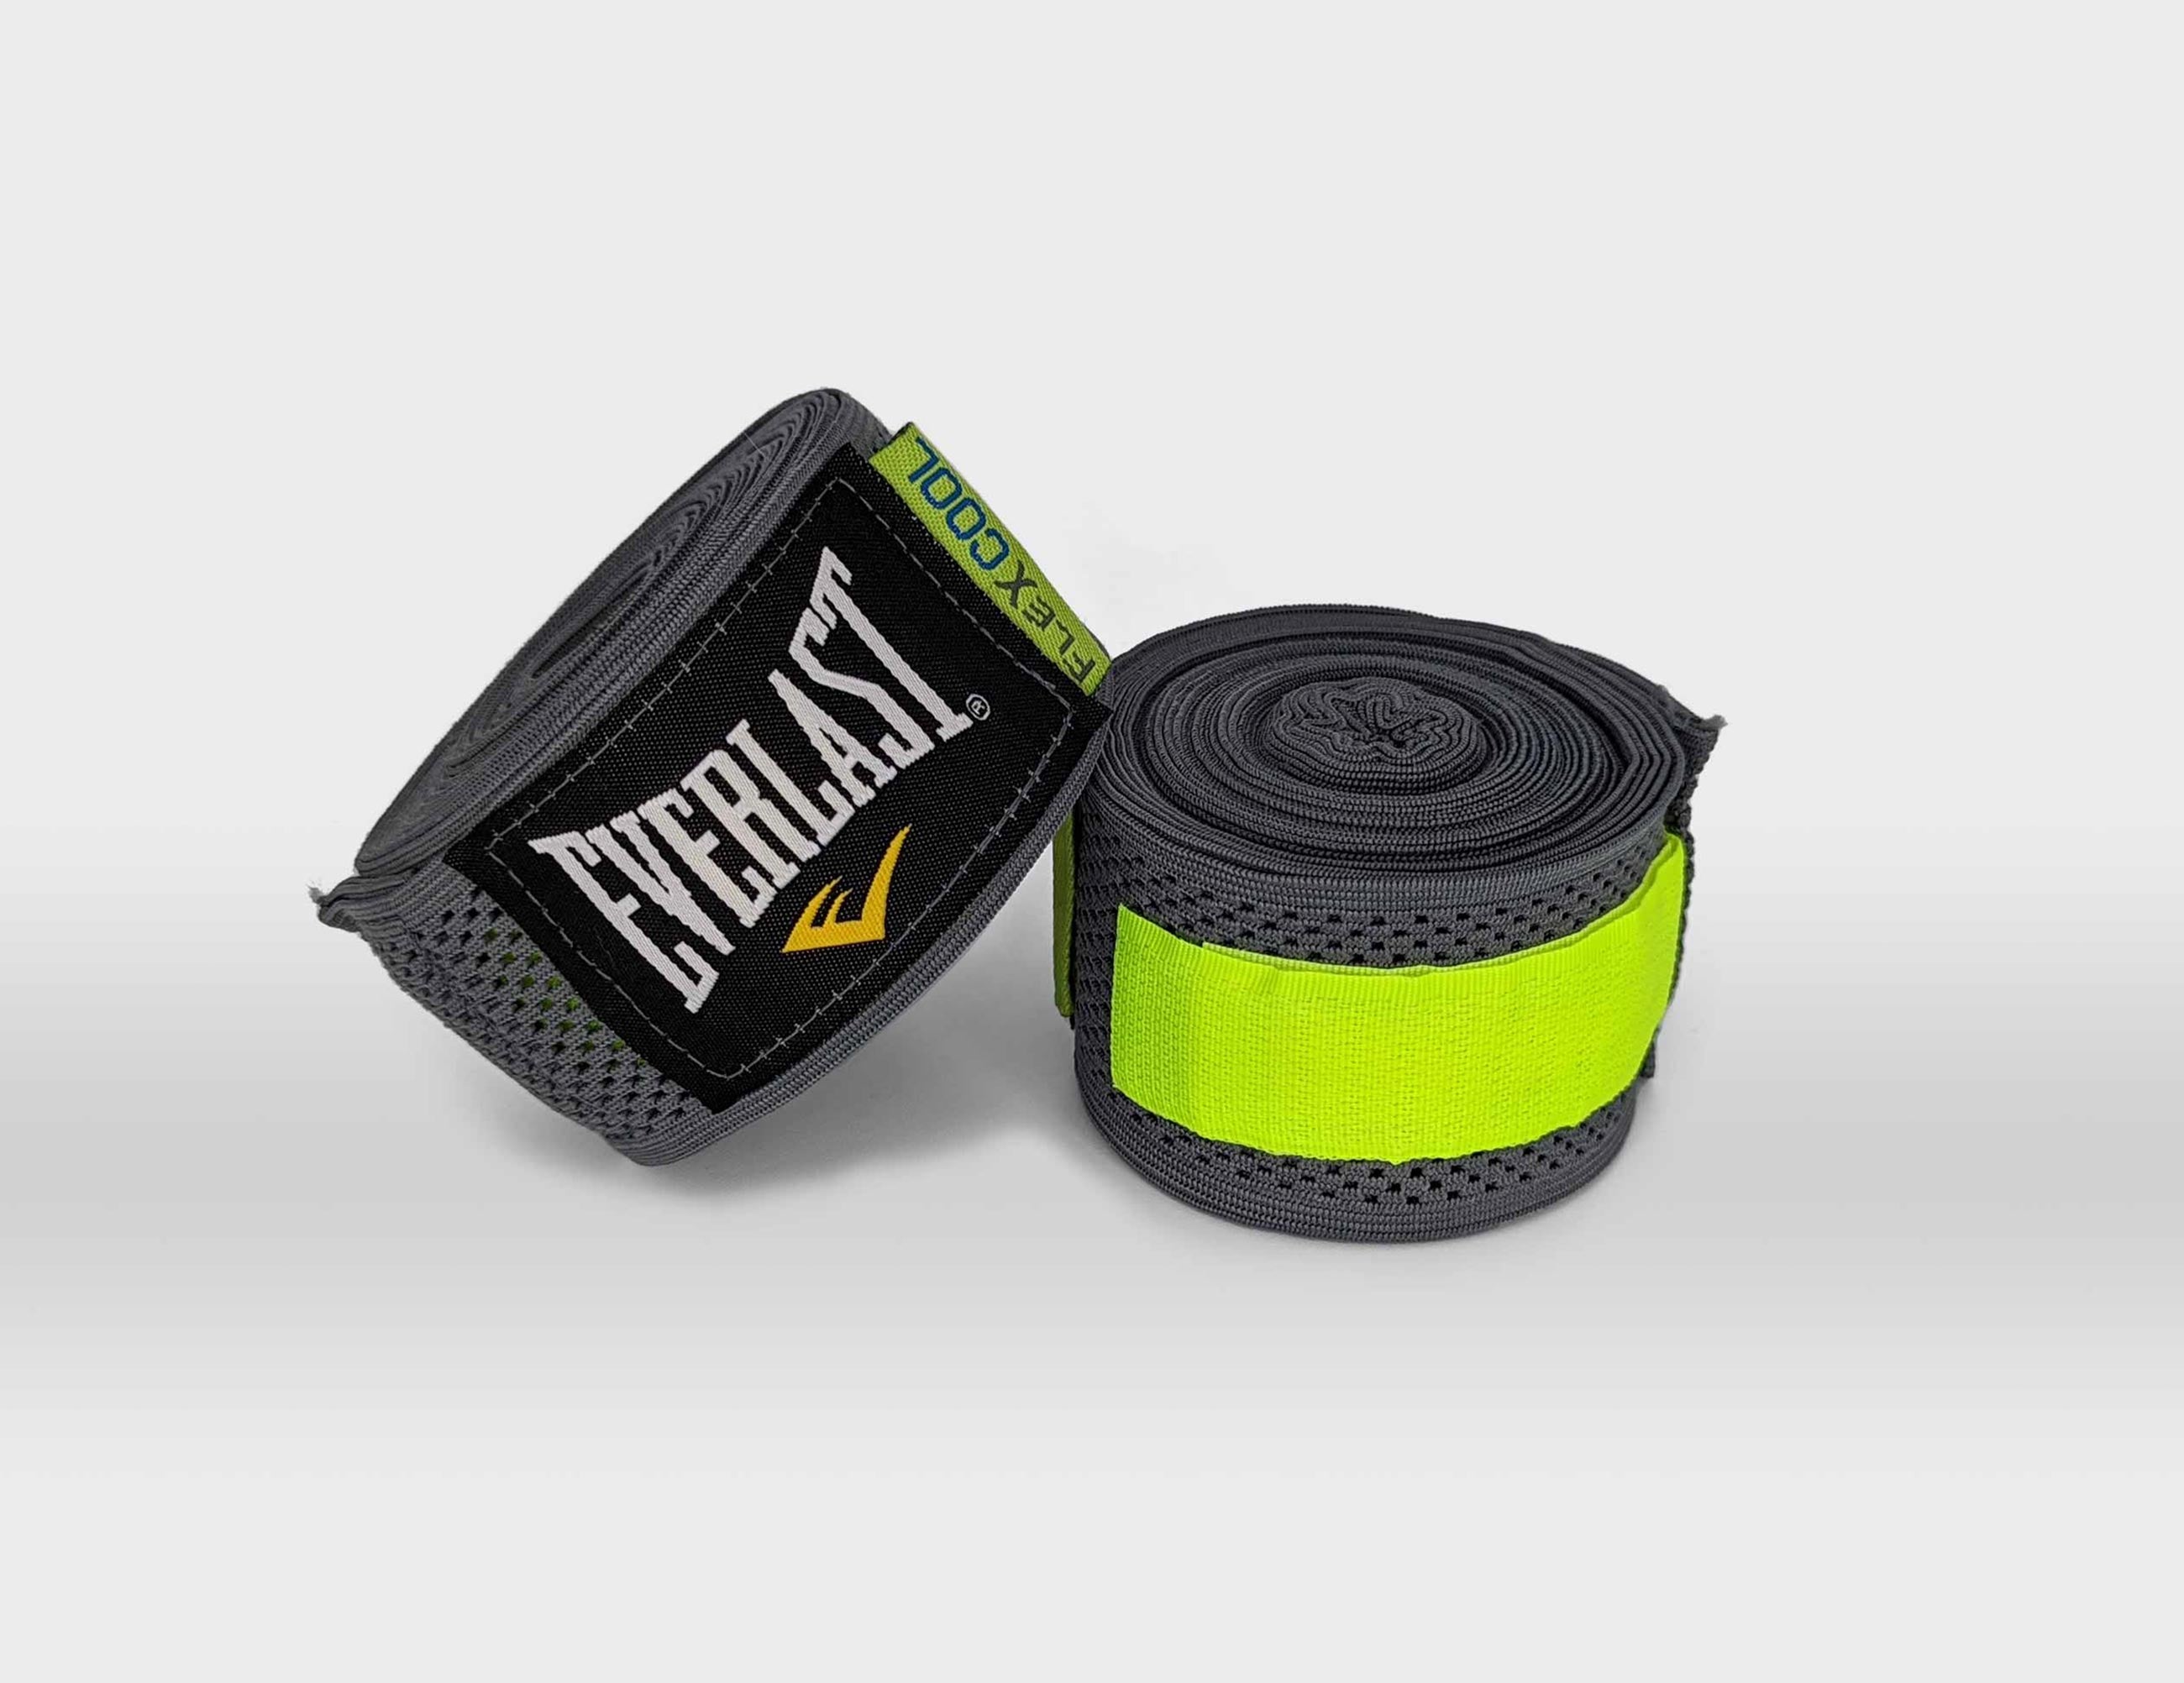 Product image of Everlast Flexcool Hand Wraps available at ATL Fight Shop. Shop online or in-store at our Roswell, GA location.